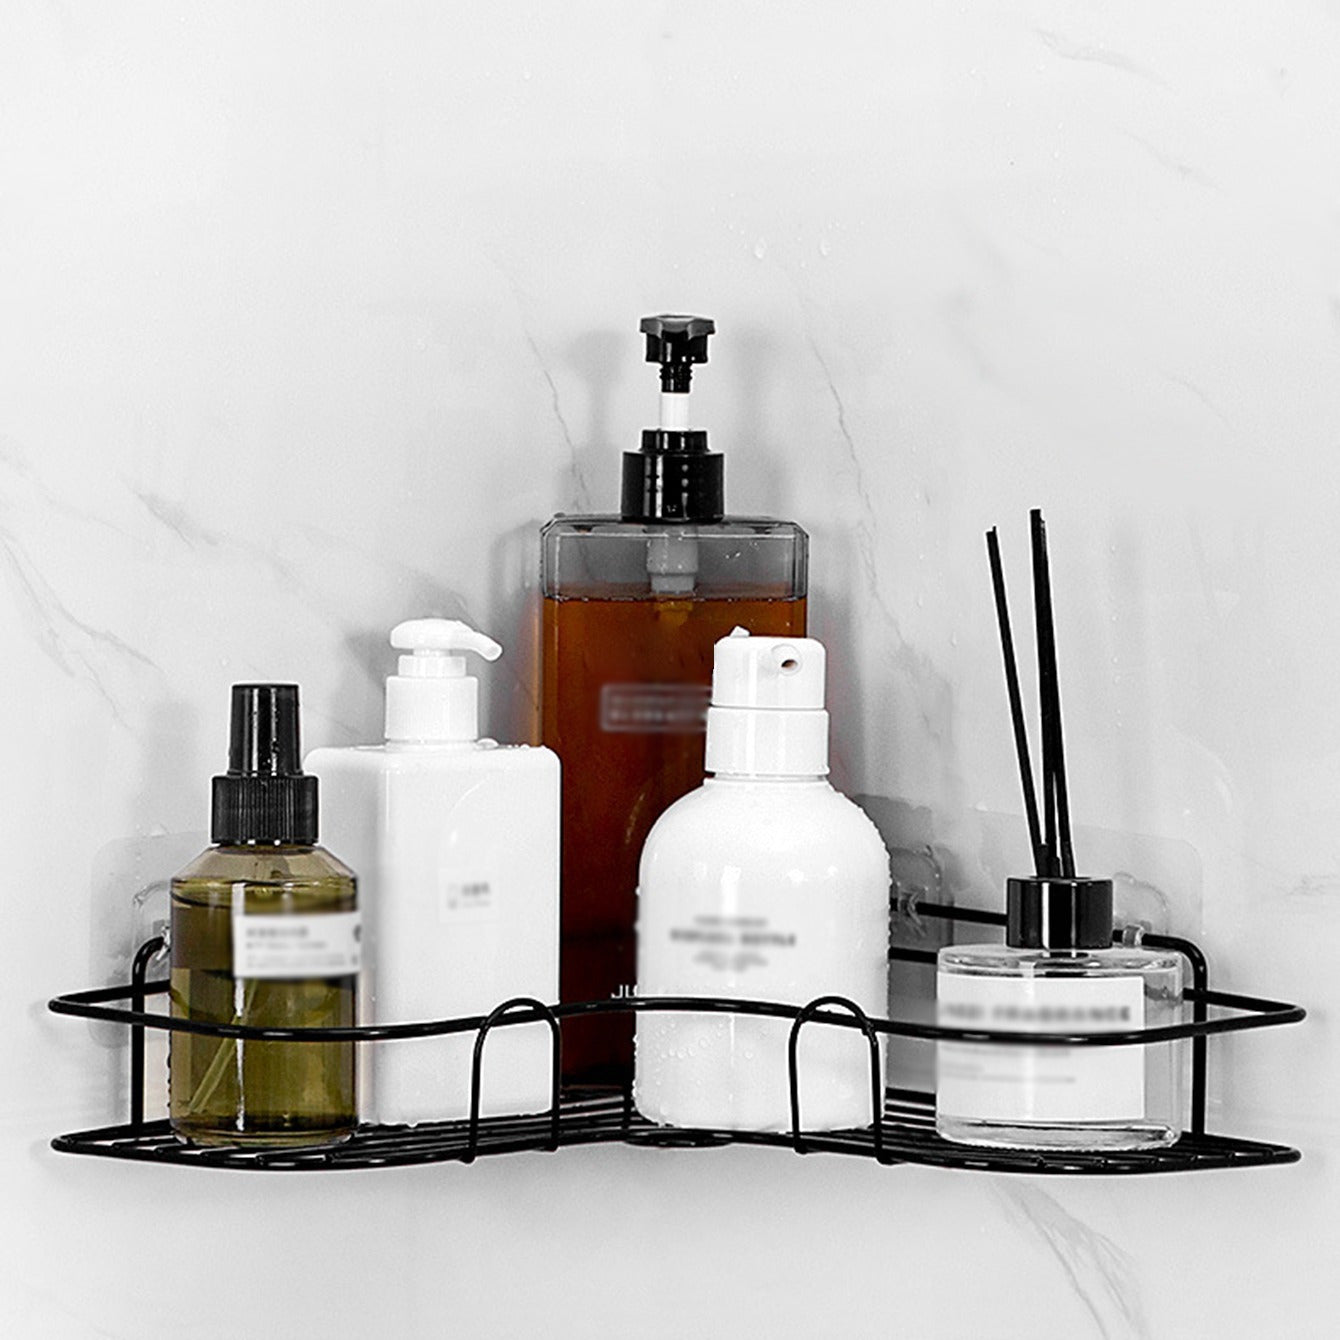 Upgrade Your Bathroom with This Stylish 1pc Triangle Storage Rack!